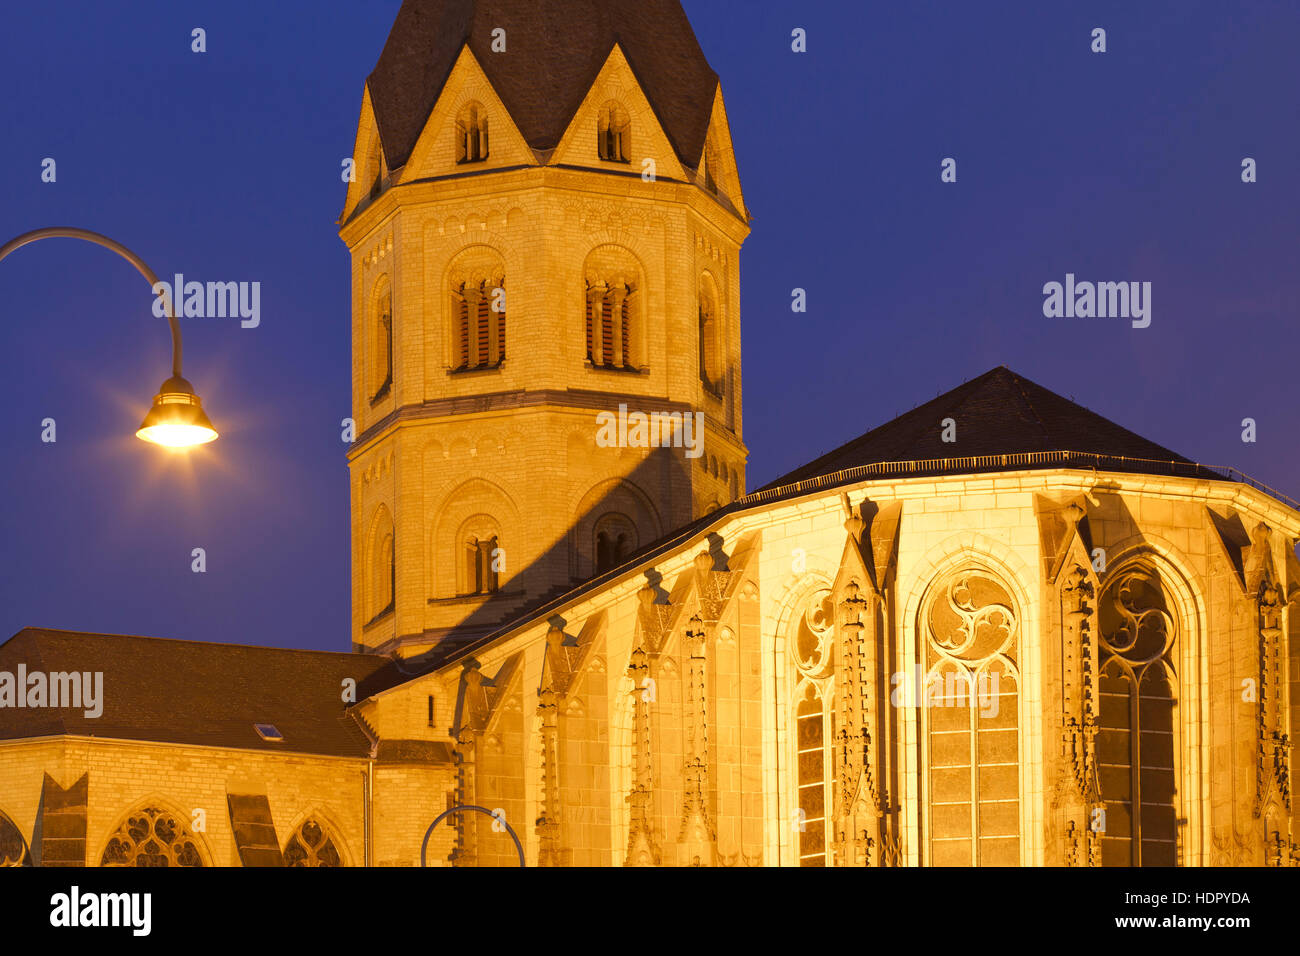 Europe, Germany, North Rhine-Westphalia, Cologne, the romanesque church St. Andreas in the city. Stock Photo